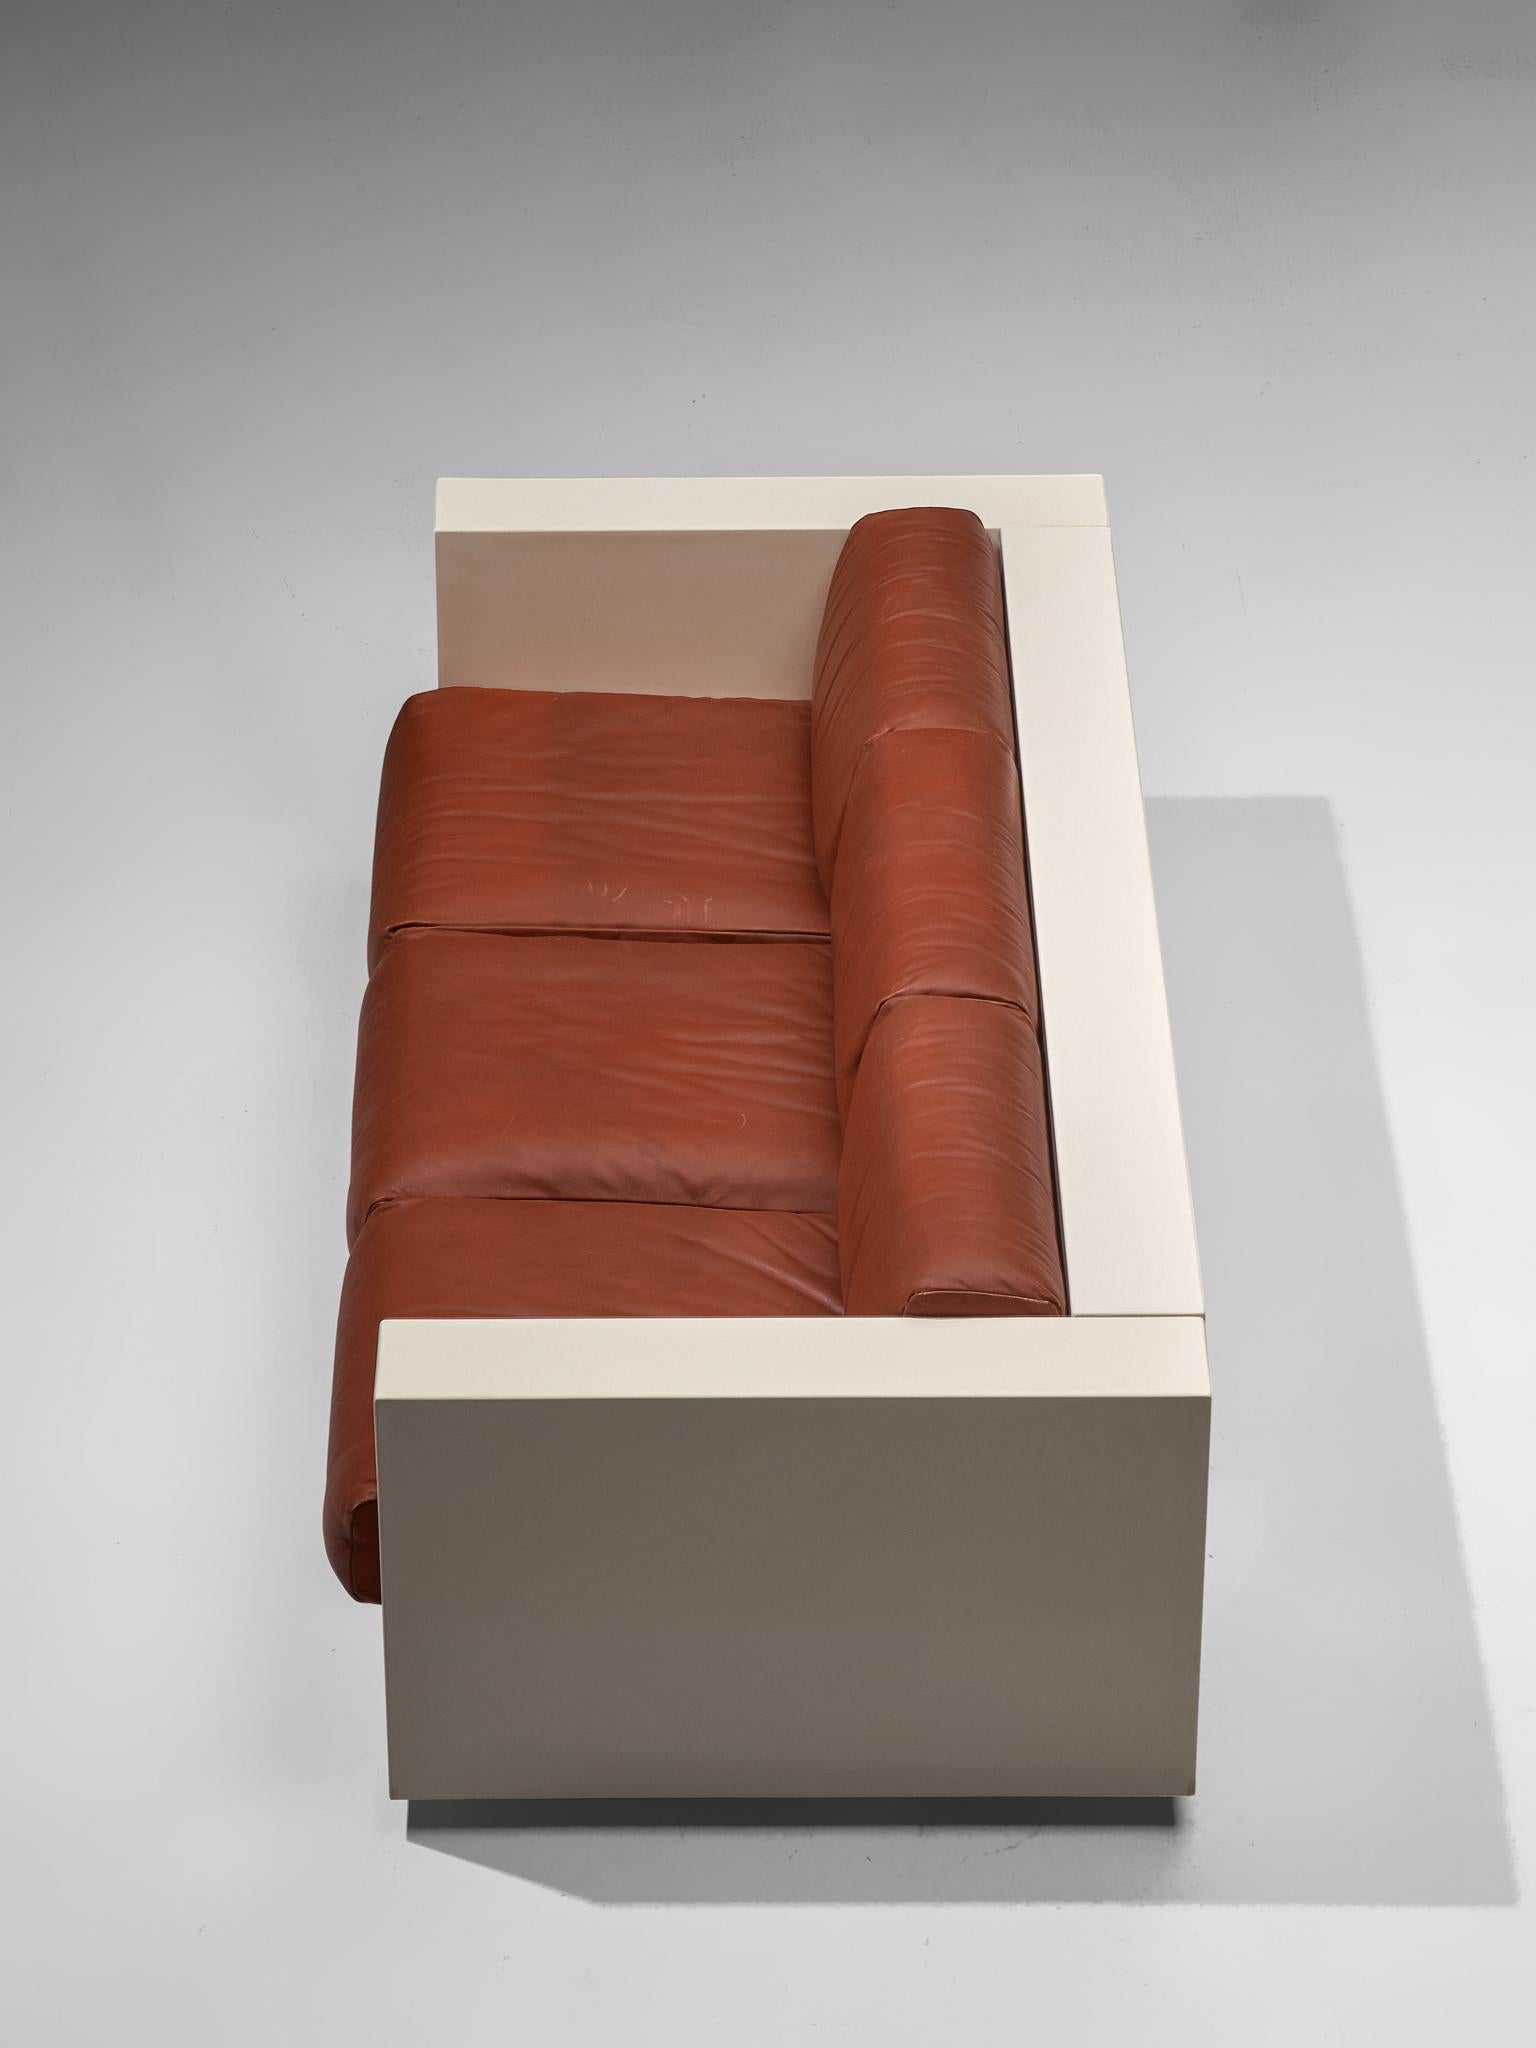 Vignelli 'Saratoga' Pair of Large White Sofa with Red Leather 1